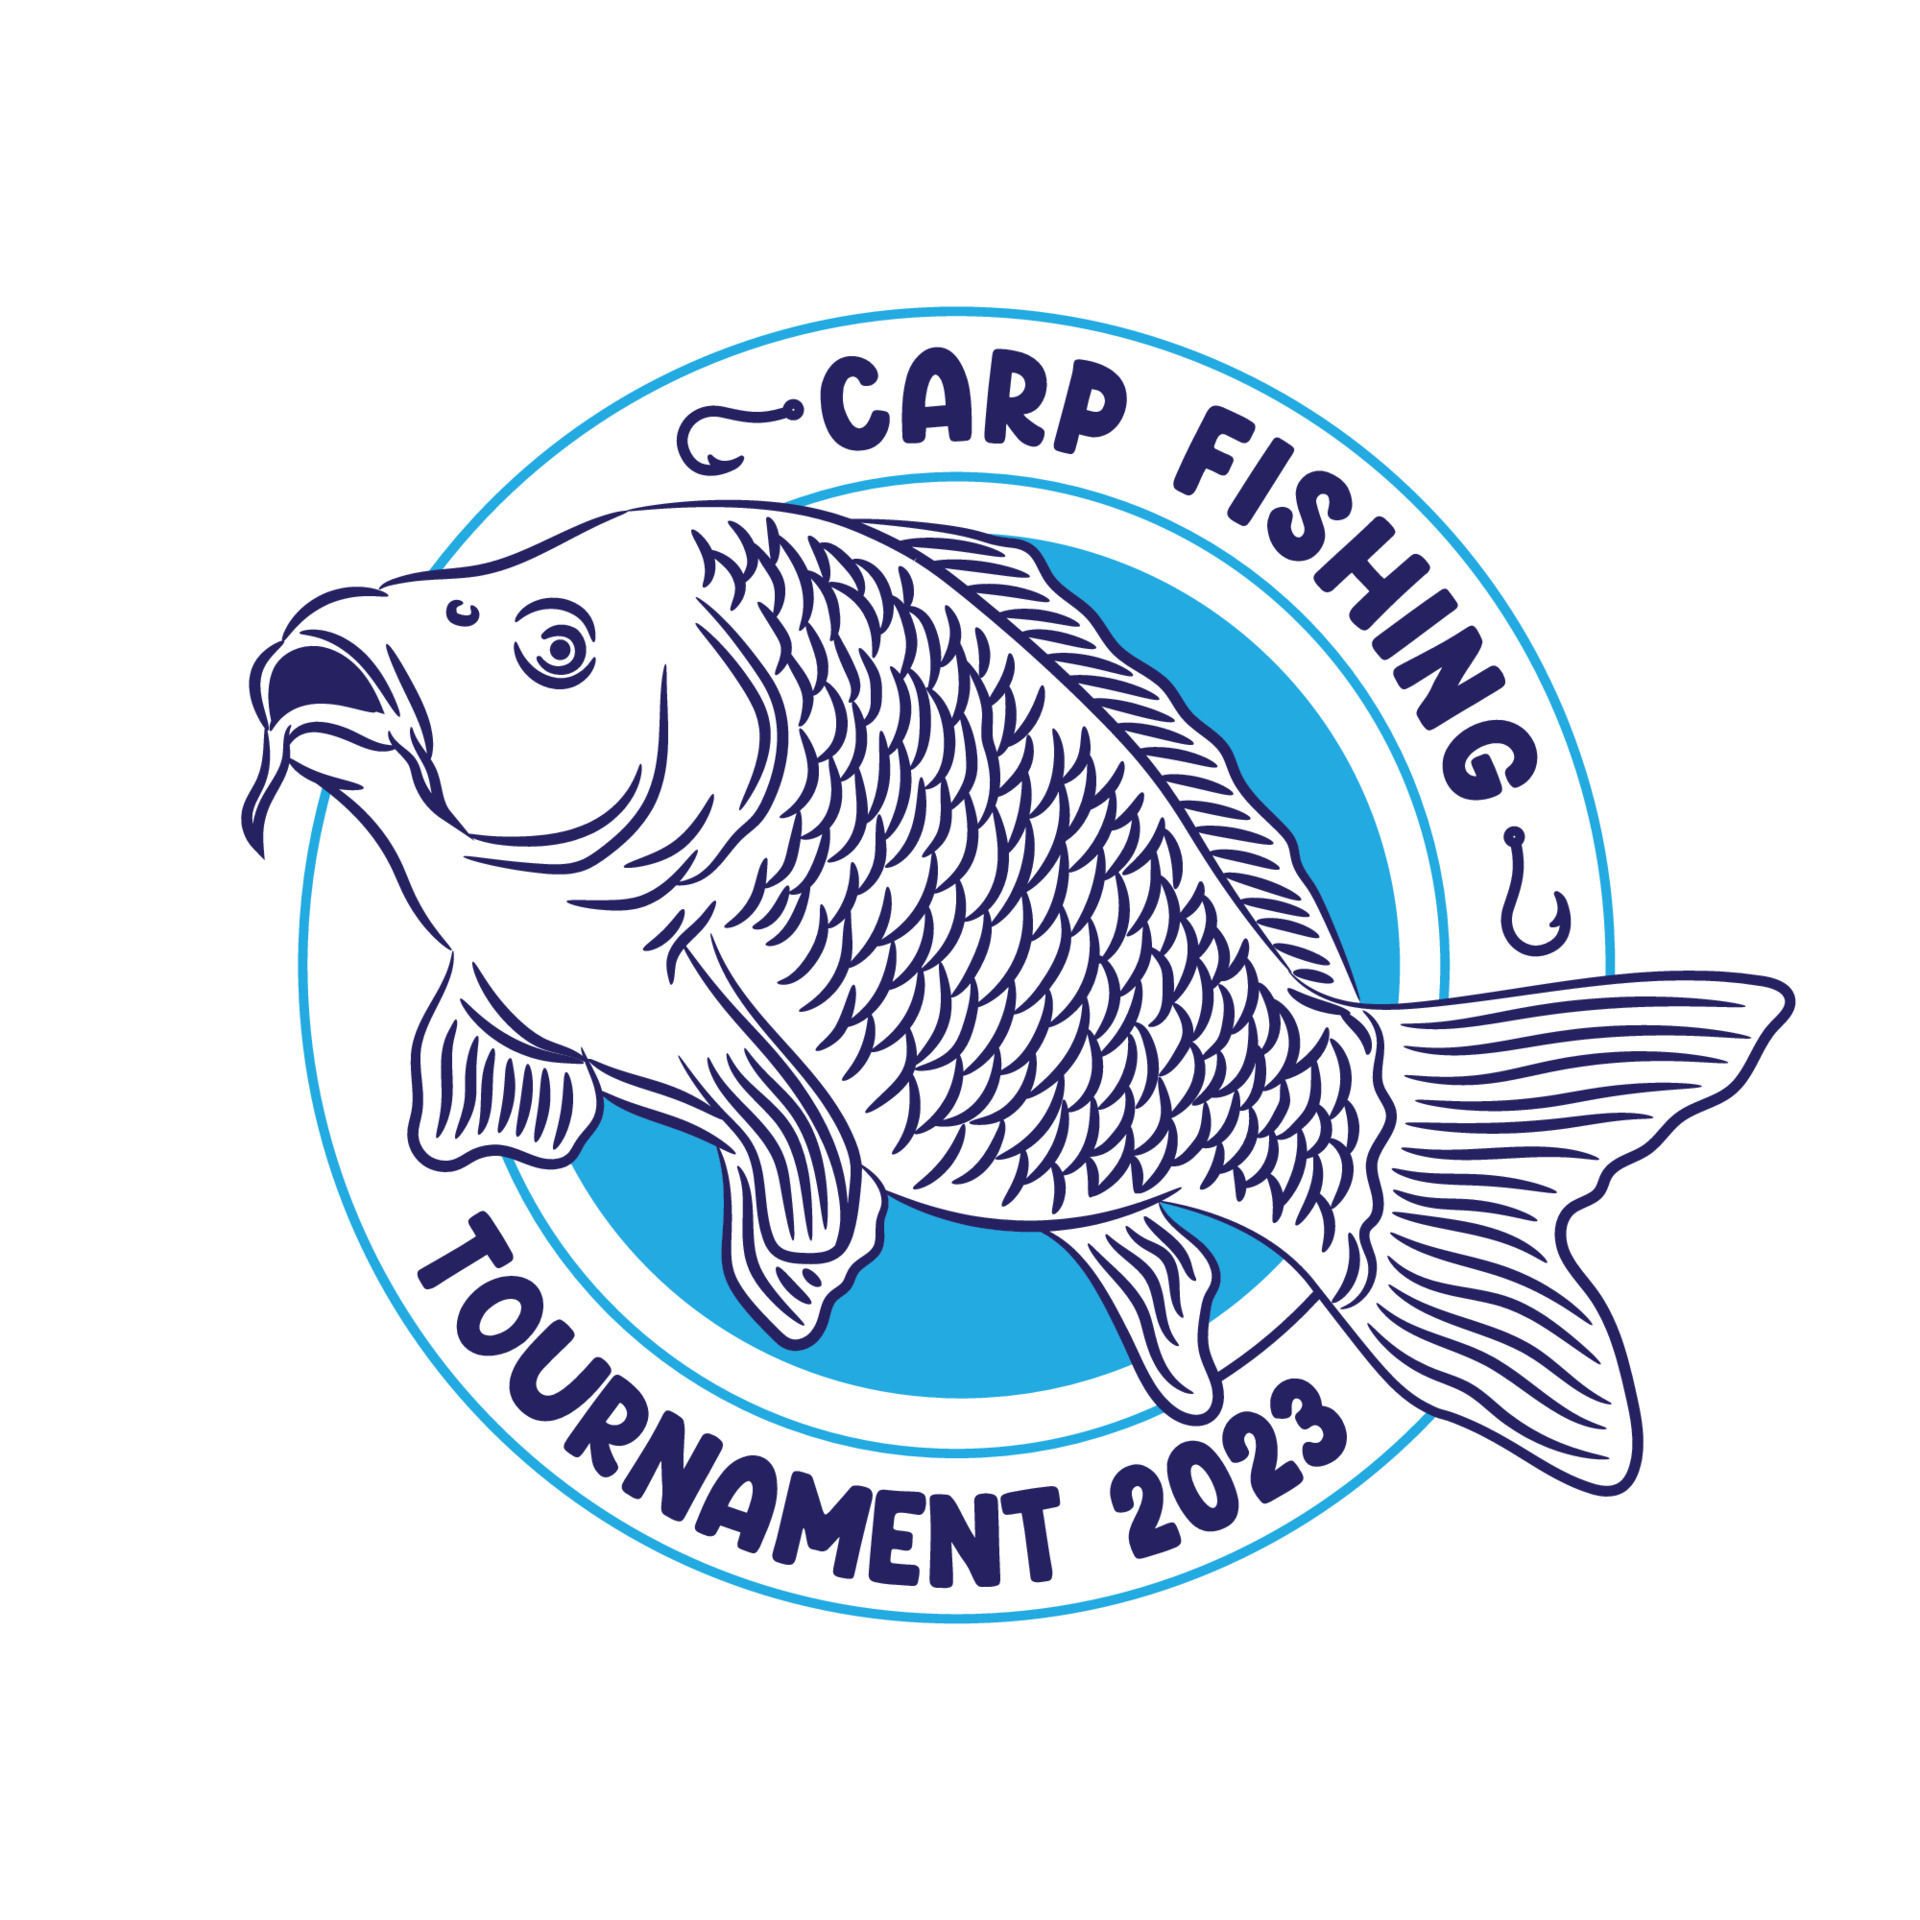 https://static.vecteezy.com/system/resources/previews/014/203/326/original/carp-fishing-logo-perfect-for-fish-supplier-company-and-brand-product-logo-and-t-shirt-design-vector.jpg